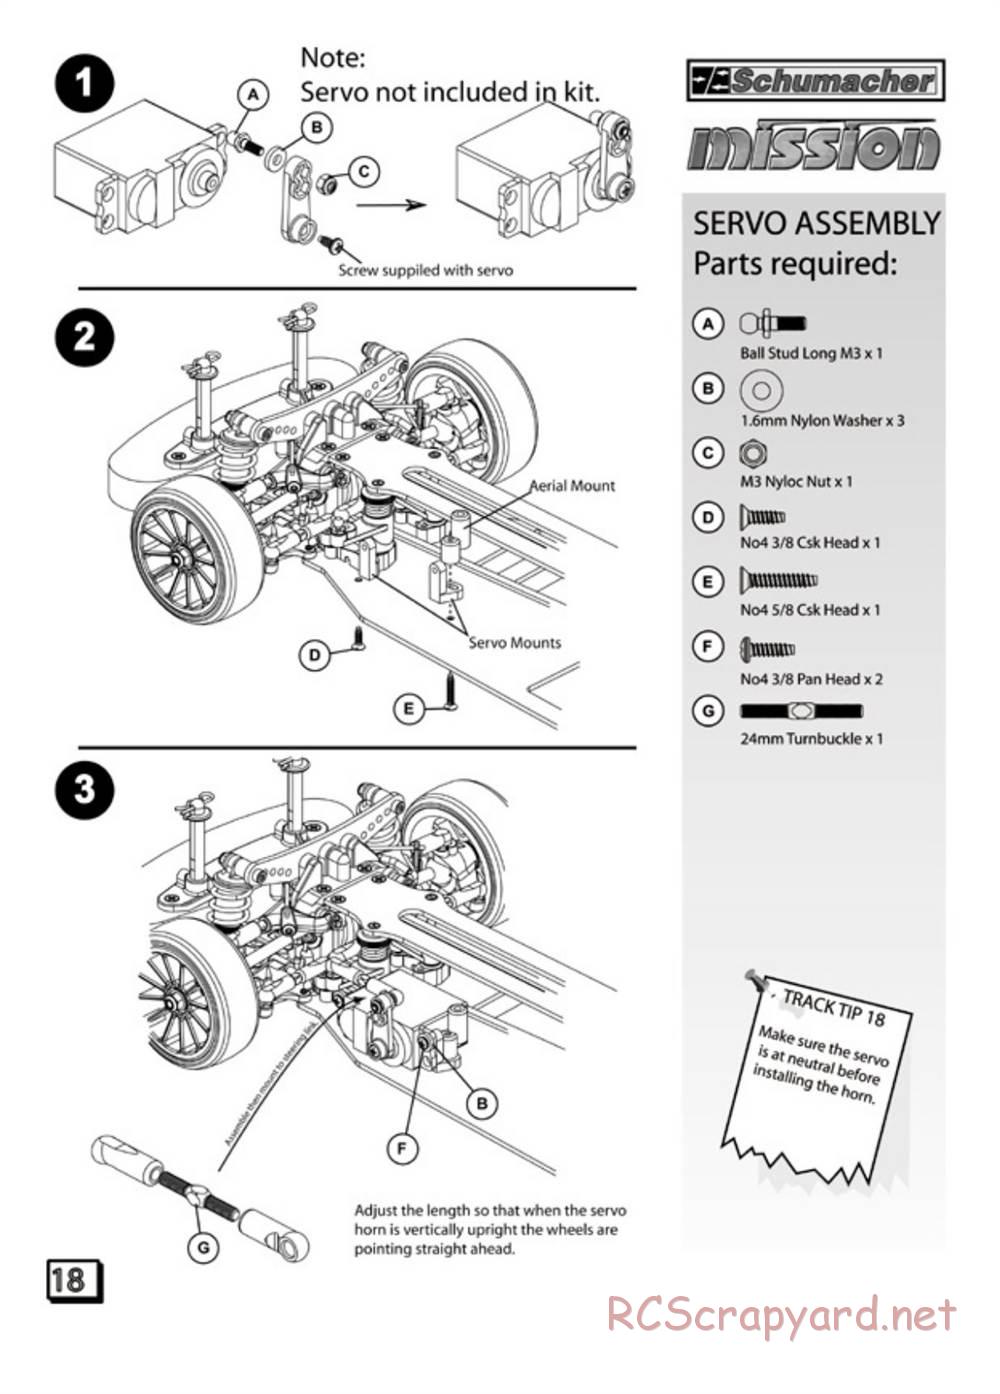 Schumacher - Mission - Manual - Page 19